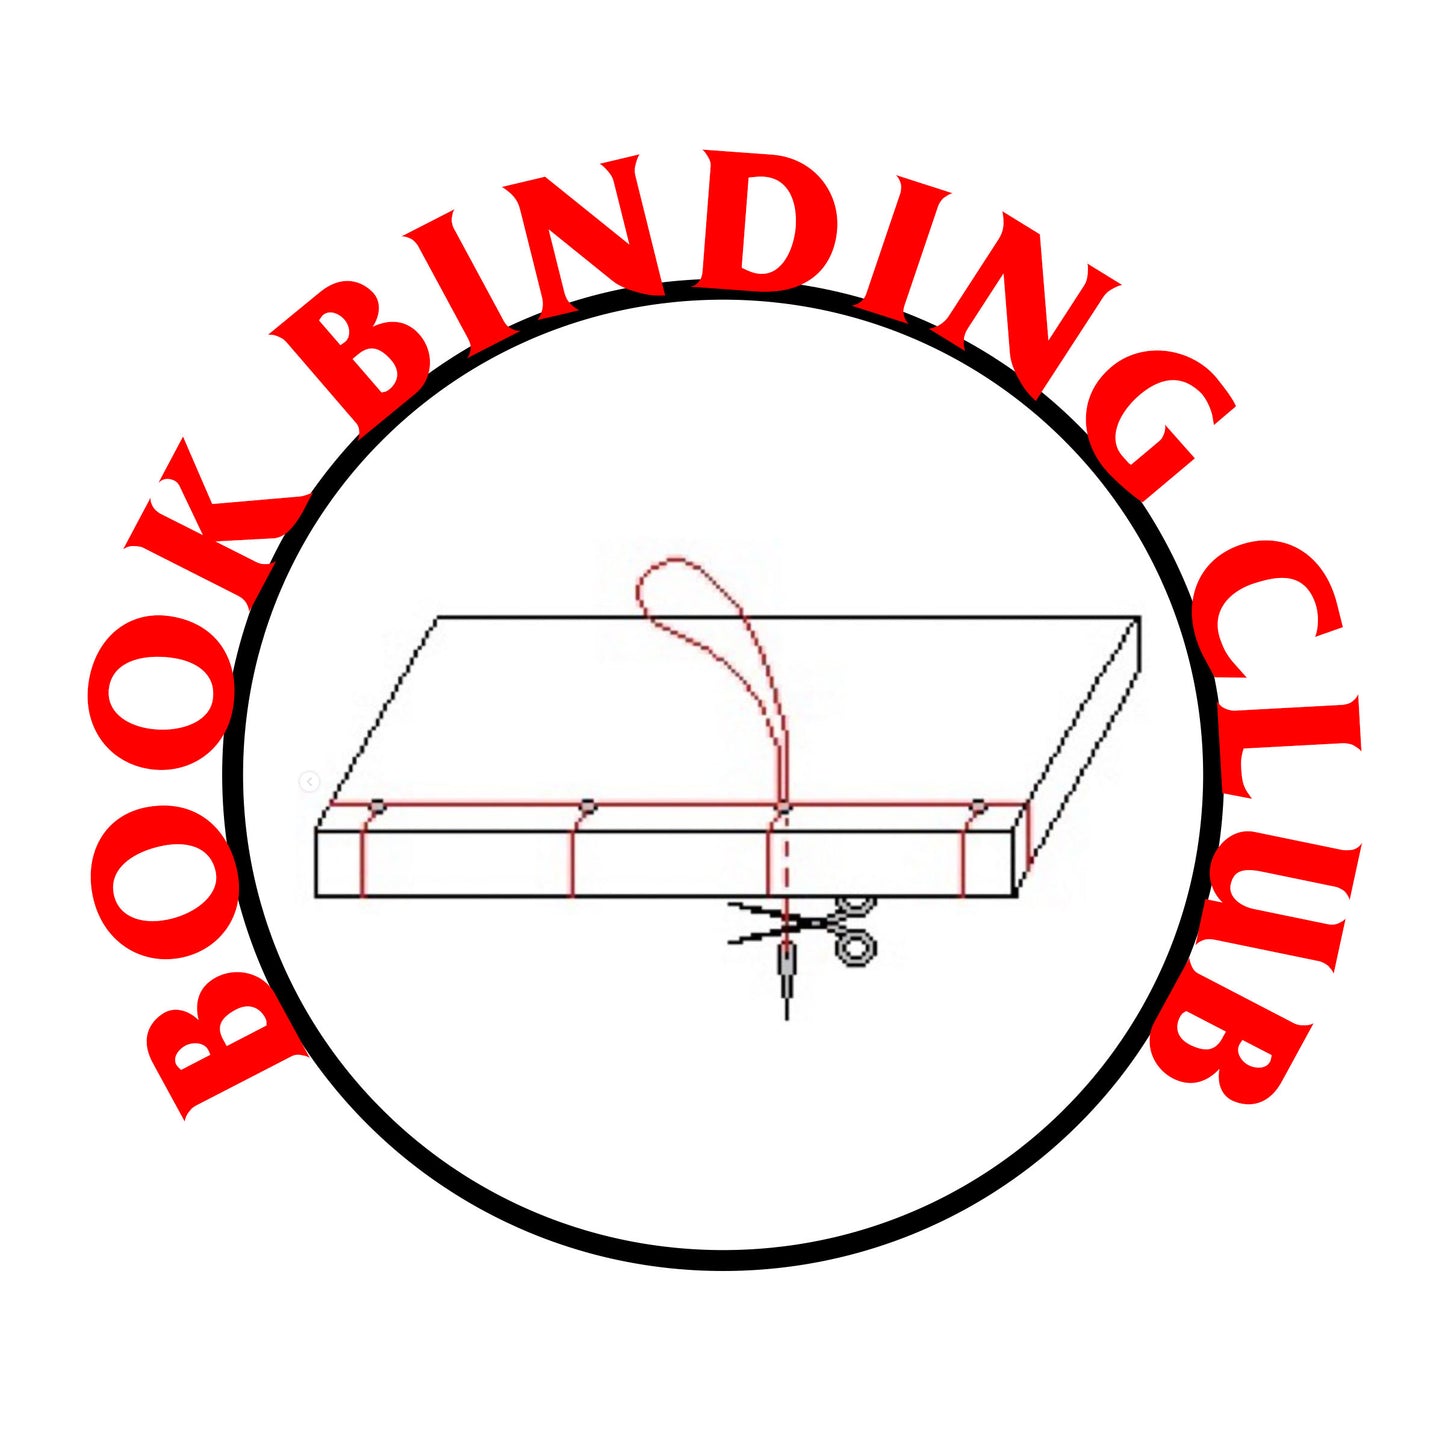 INTRODUCTION TO BOOKBINDING: ZINES & ARTIST BOOKS - MARCH